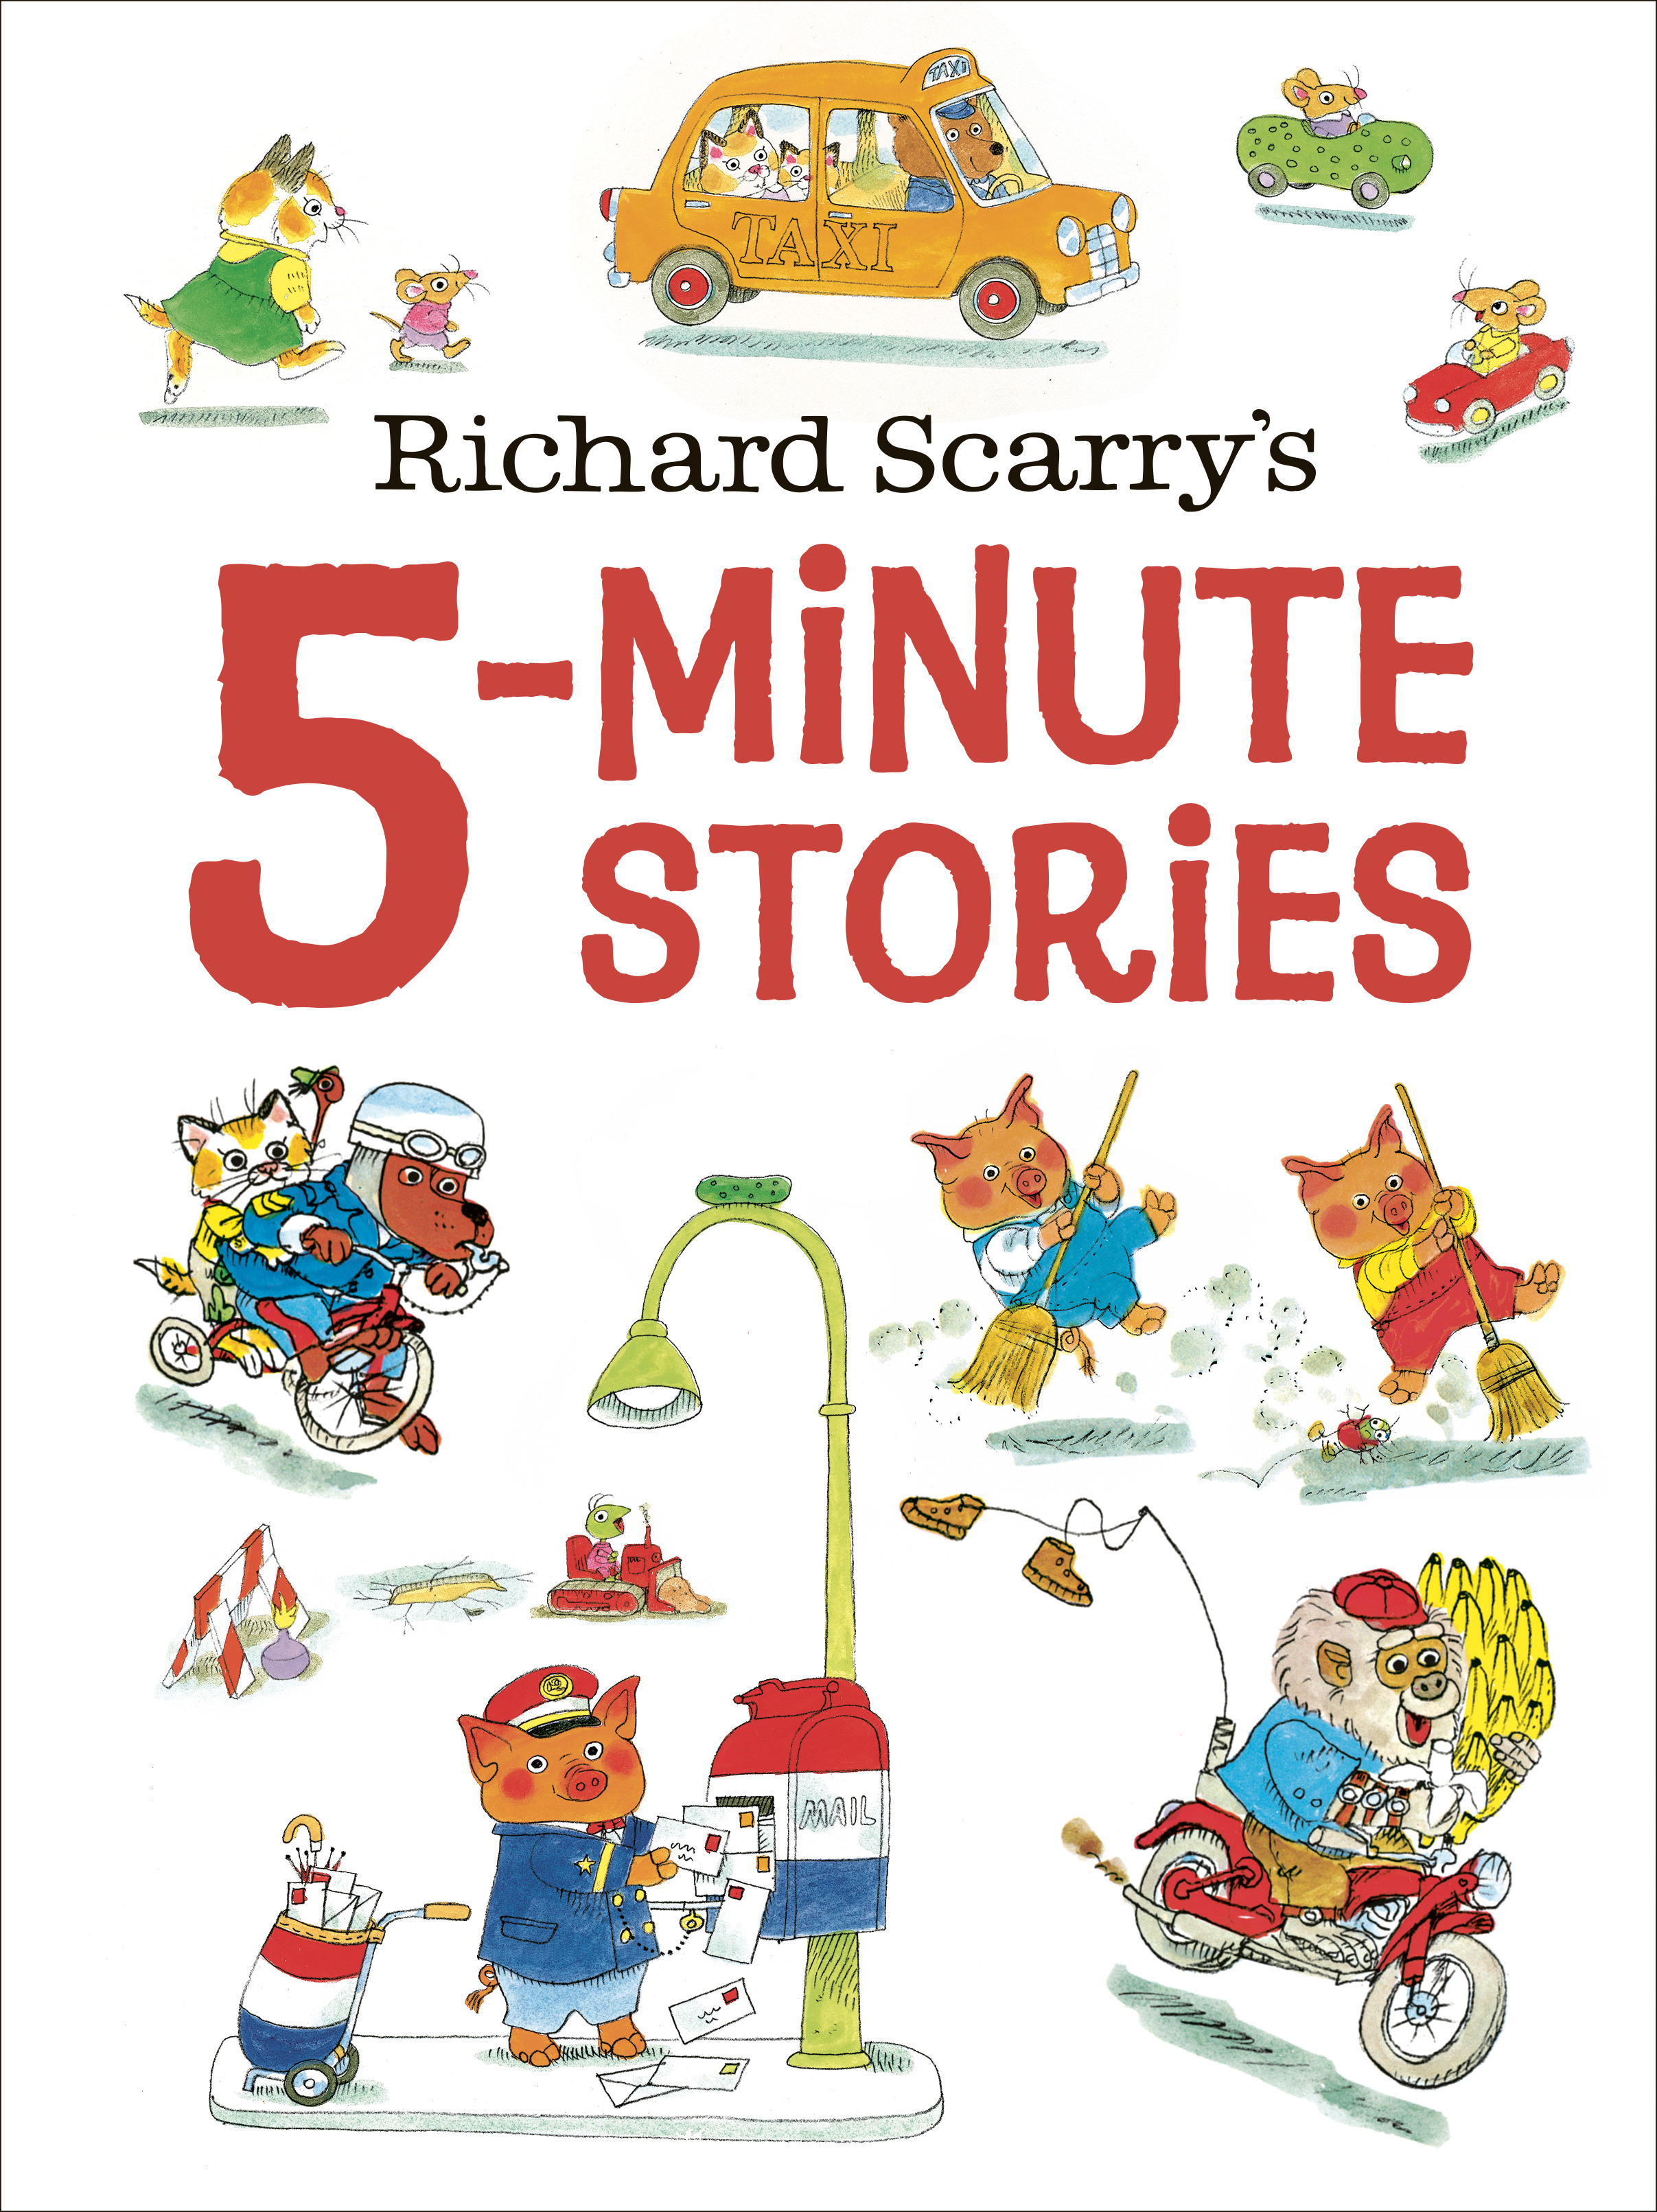 Richard Scarry's 5-Minute Stories | Scarry, Richard